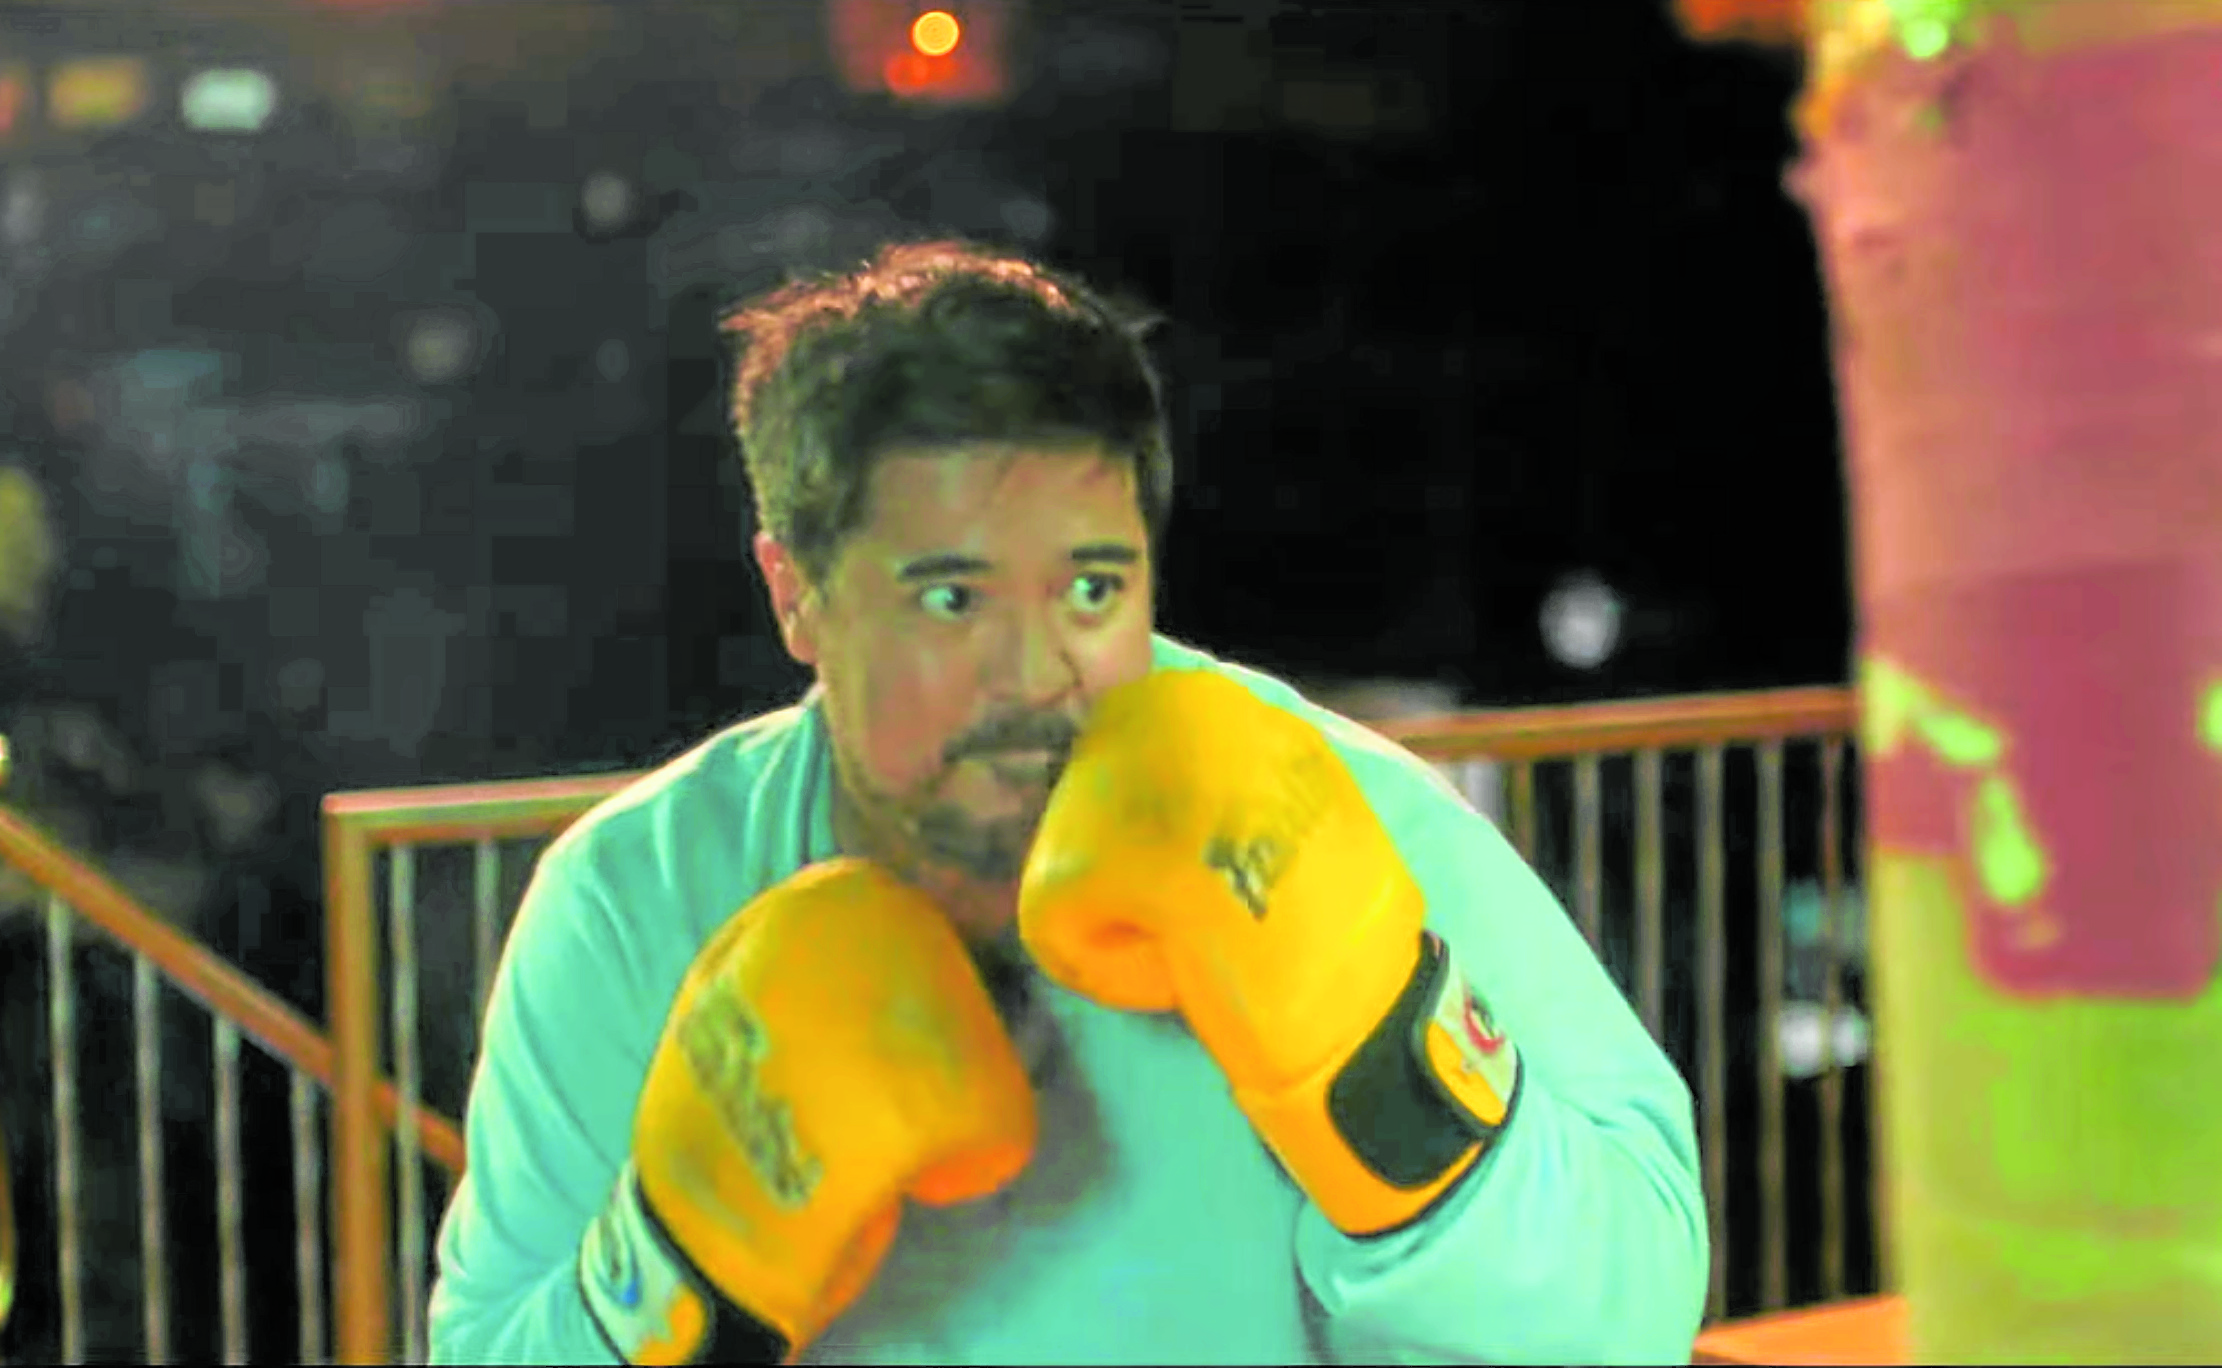 Aga Muhlach as Jimmy Boy, a retired boxer who has cancer